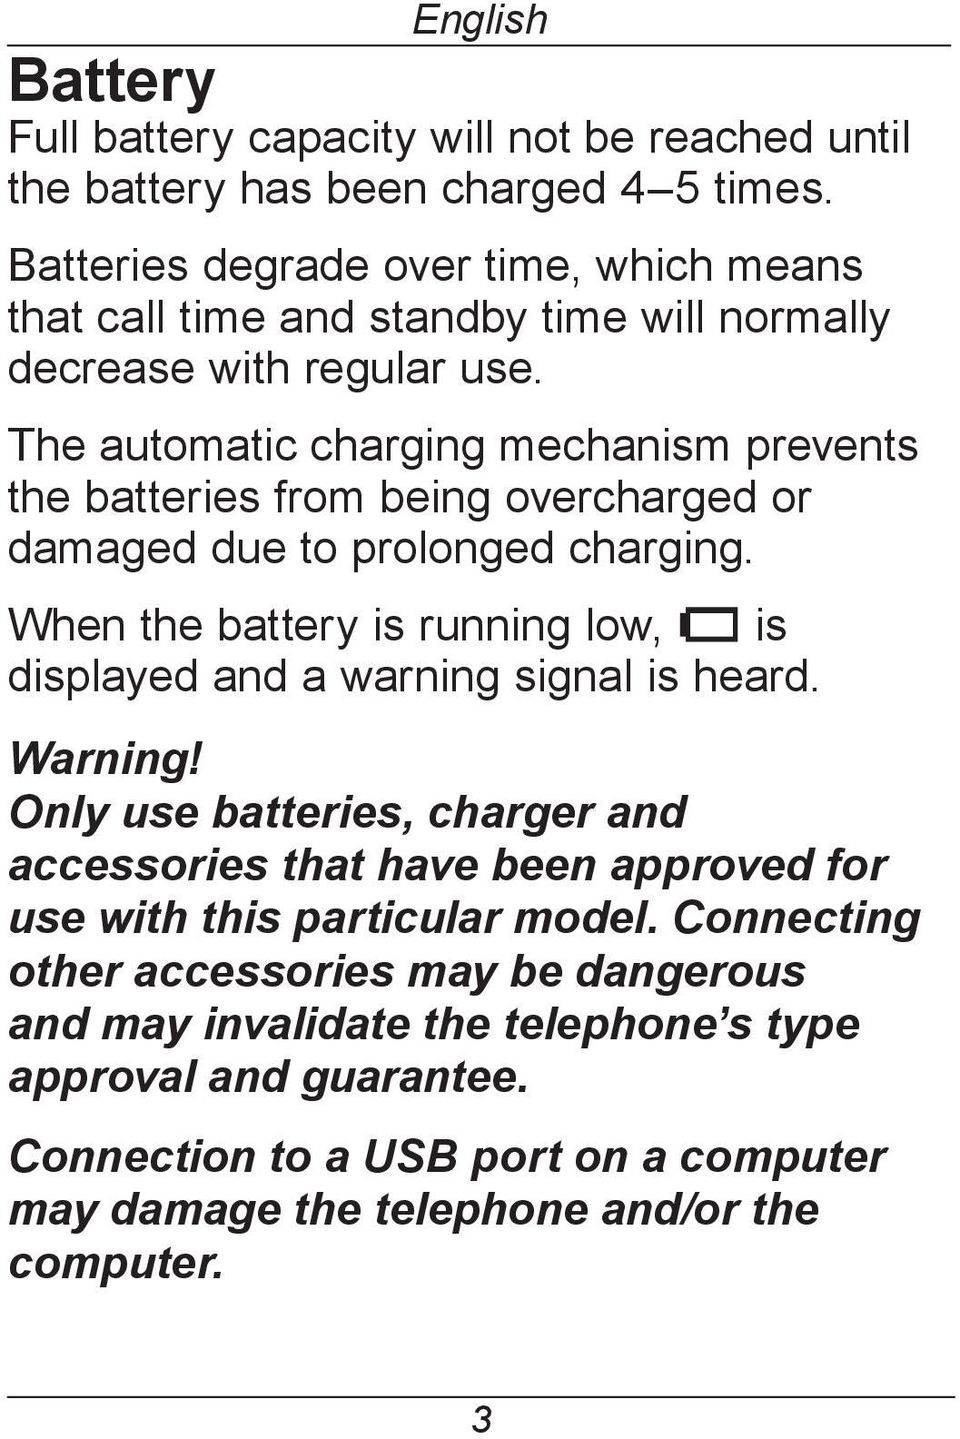 The automatic charging mechanism prevents the batteries from being overcharged or damaged due to prolonged charging.